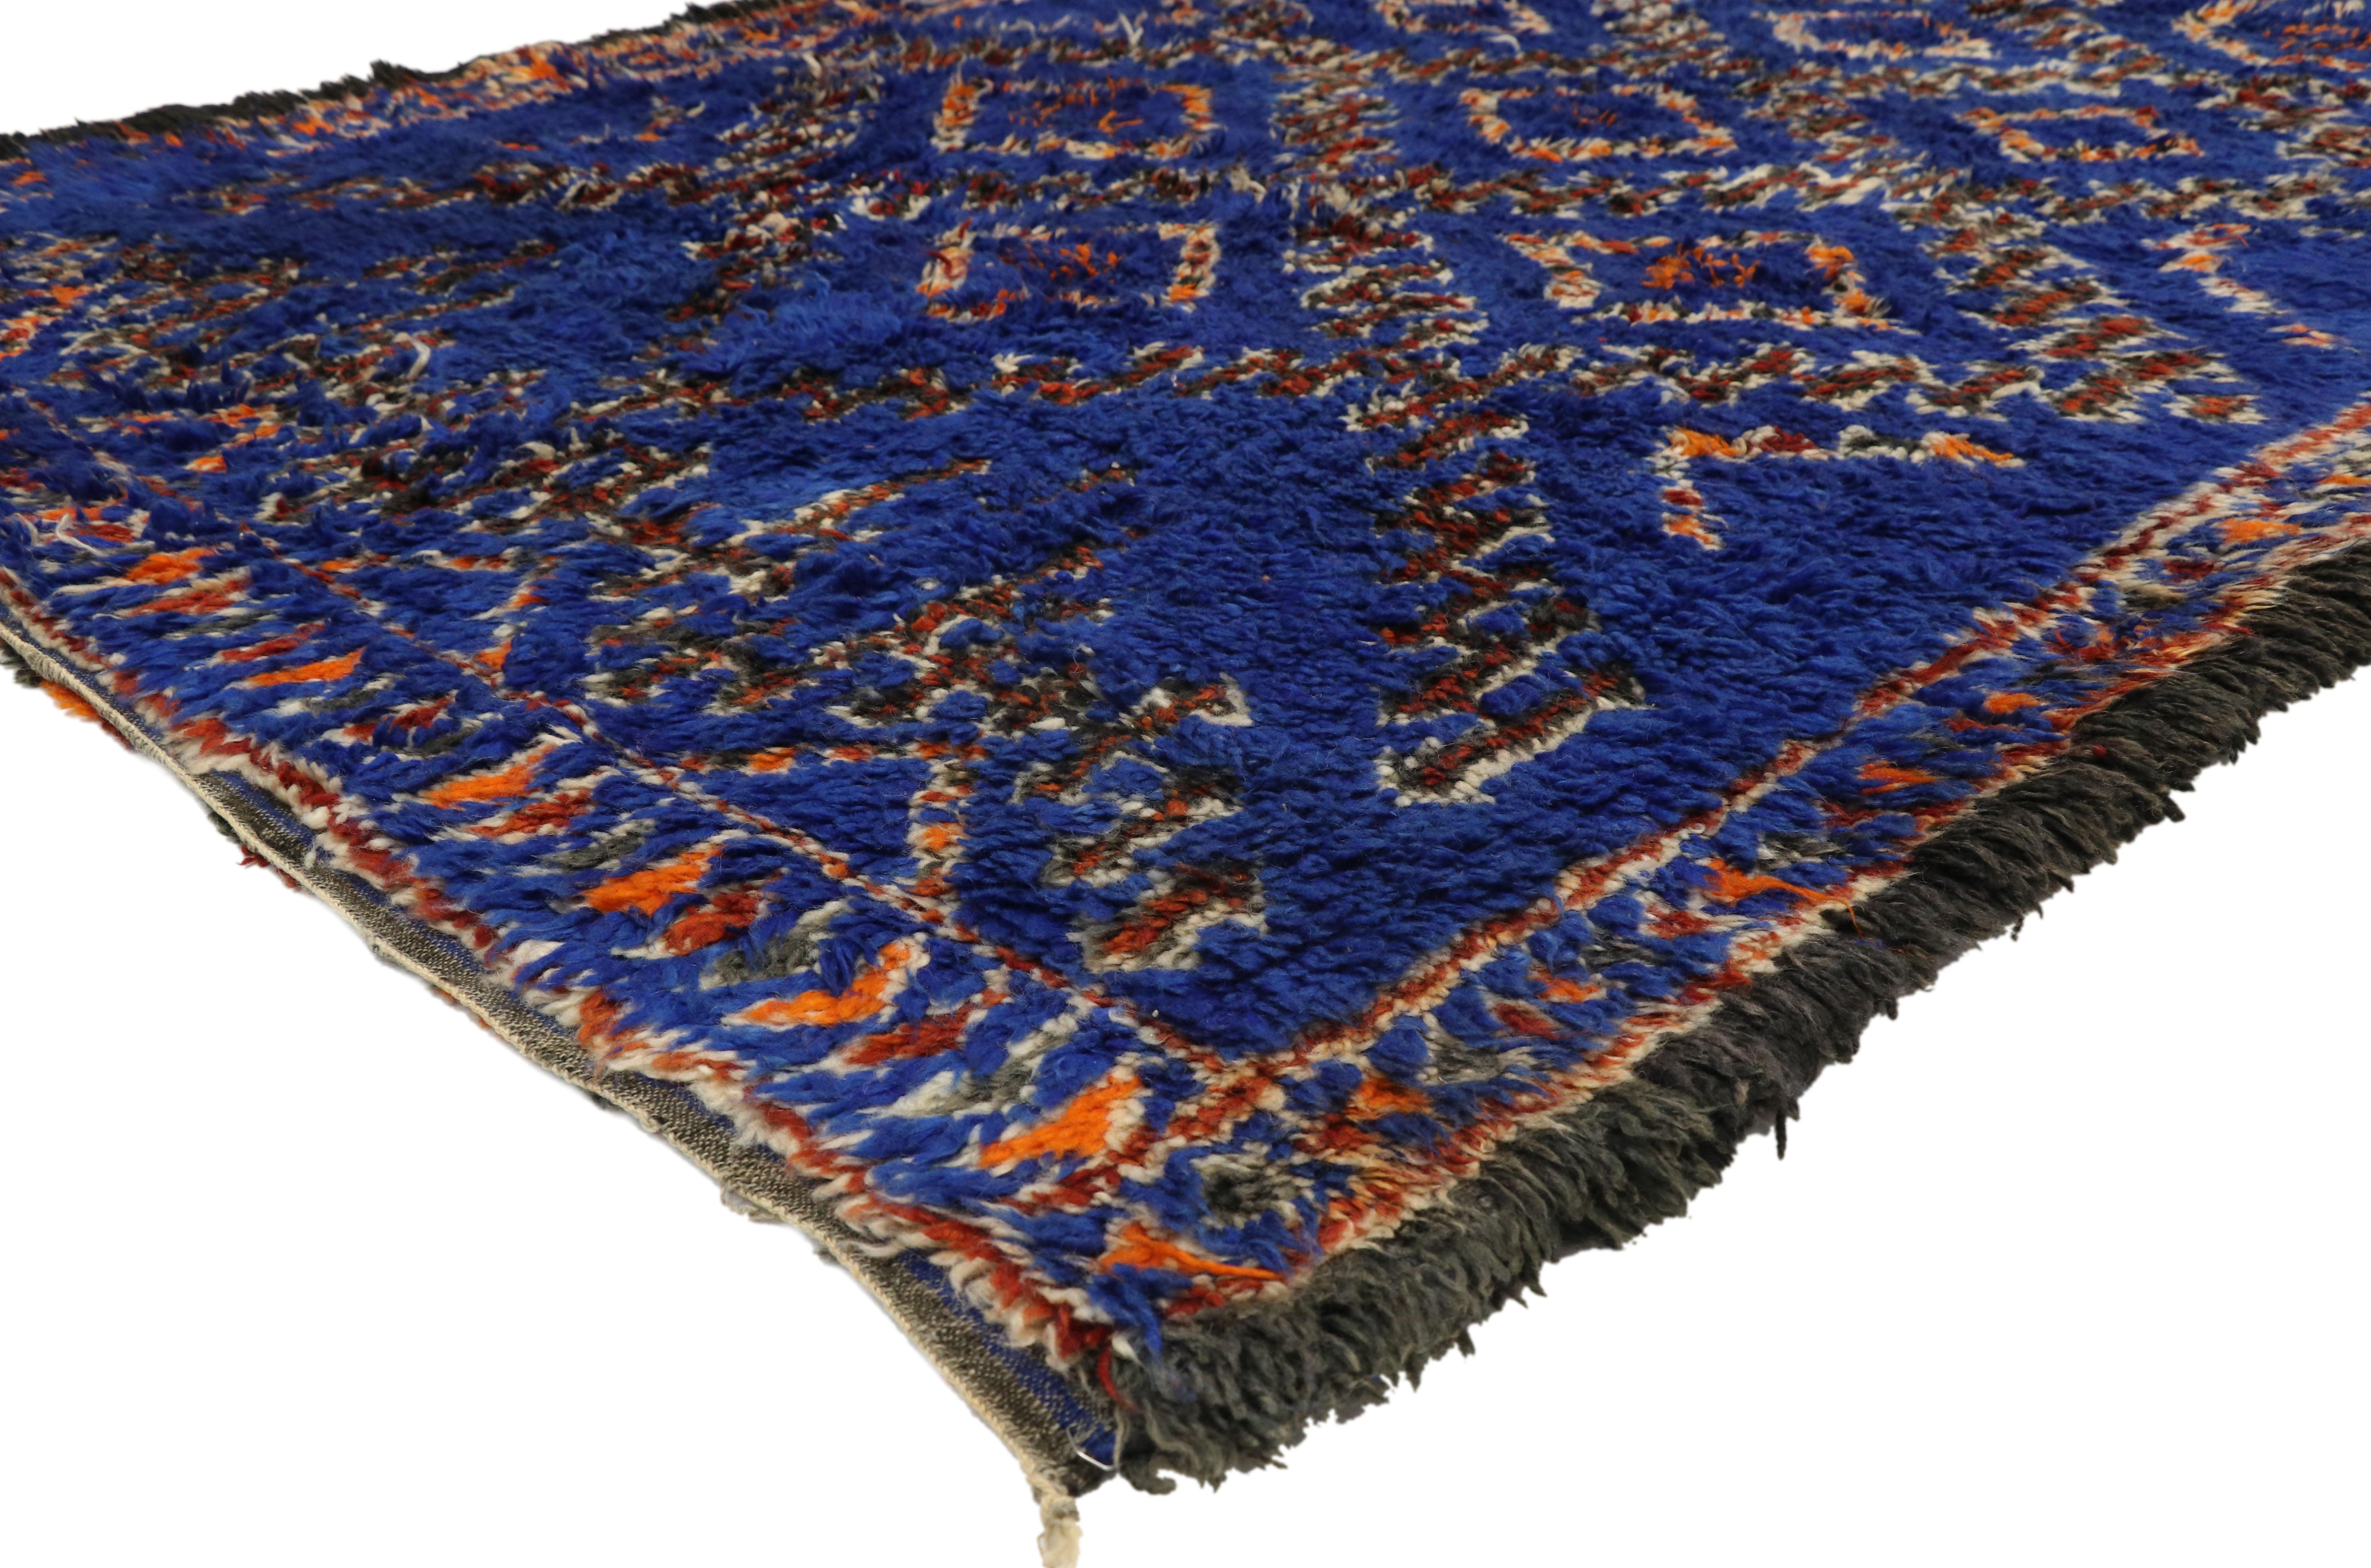 20955, vintage blue Indigo Beni M'Guild Moroccan rug, Berber Blue Moroccan rug. Featuring a luminous sapphire glow and luxury underfoot, this hand knotted wool vintage indigo blue Moroccan Beni M'Guild rug astounds with its beauty. It features a